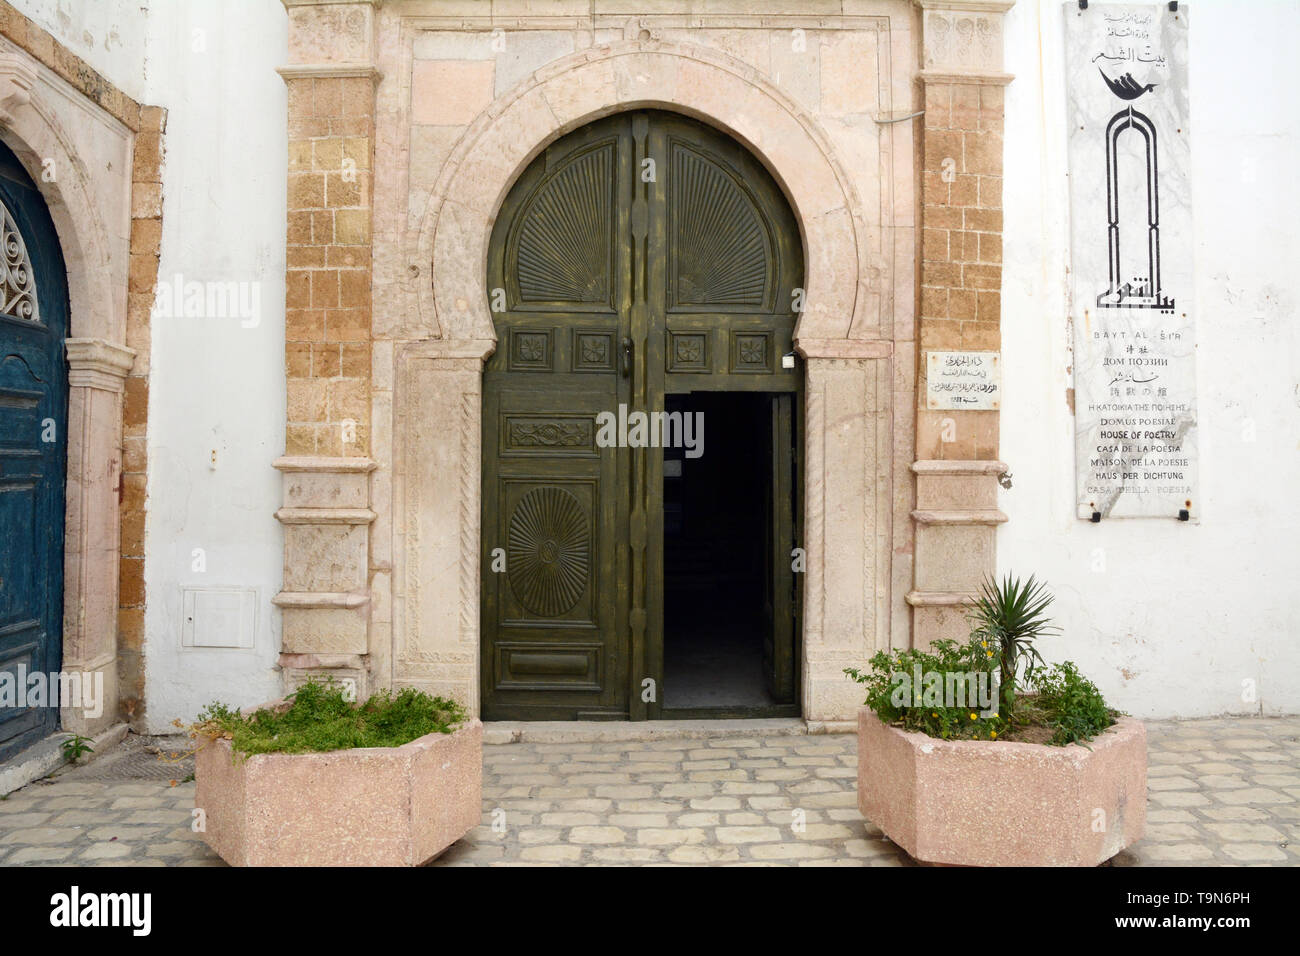 The traditional Islamic wooden door of an old 16th century converted house in an alleyway in the medina (old city) of Tunis, Tunisia. Stock Photo